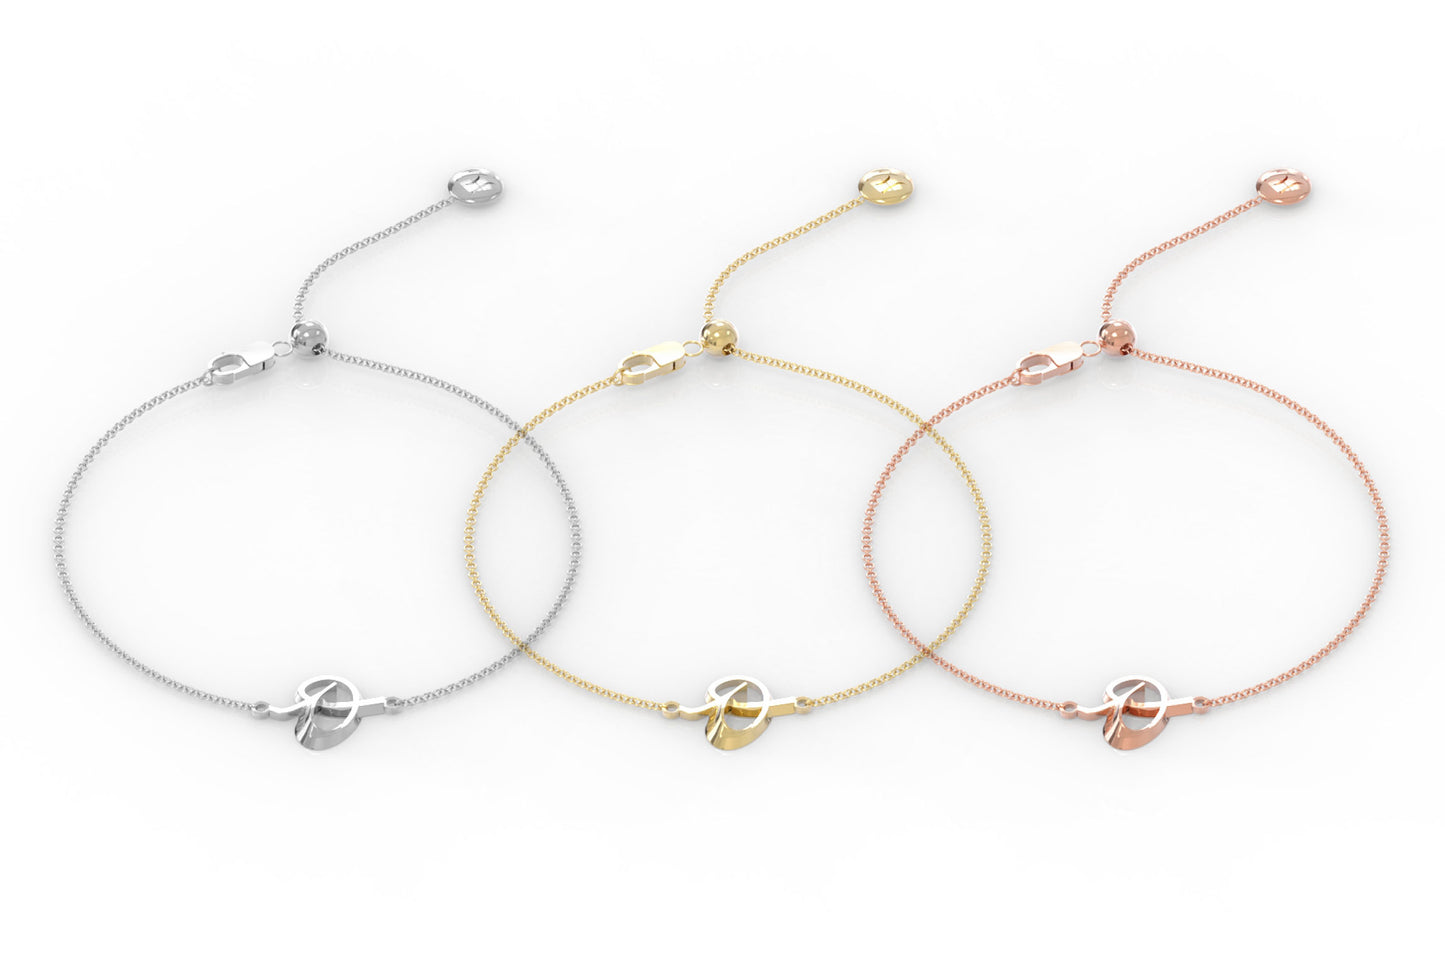 The Love Collect - "O" Bracelet